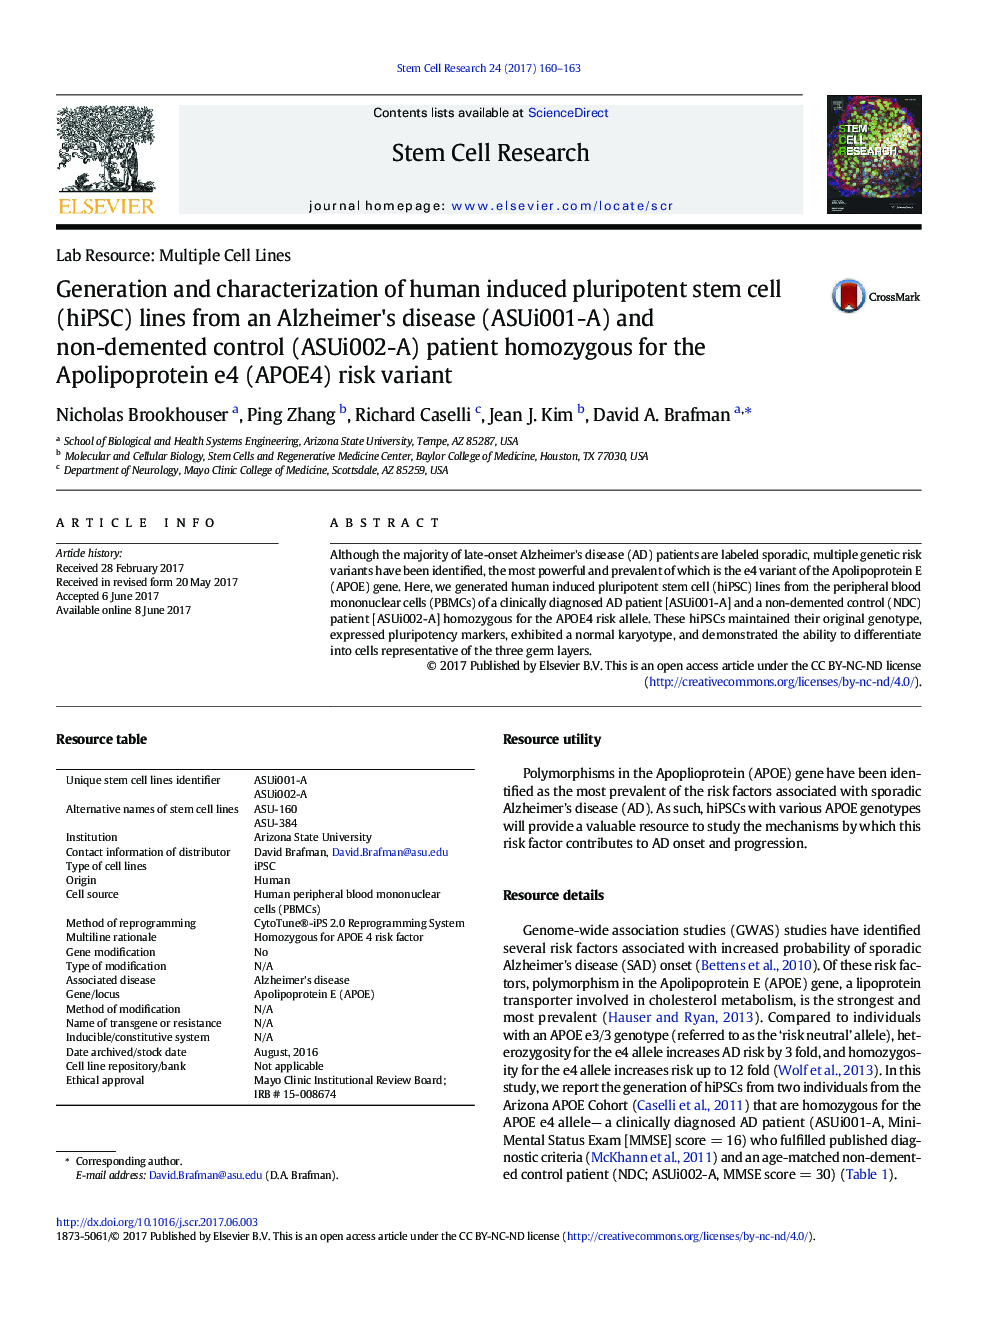 Generation and characterization of human induced pluripotent stem cell (hiPSC) lines from an Alzheimer's disease (ASUi001-A) and non-demented control (ASUi002-A) patient homozygous for the Apolipoprotein e4 (APOE4) risk variant